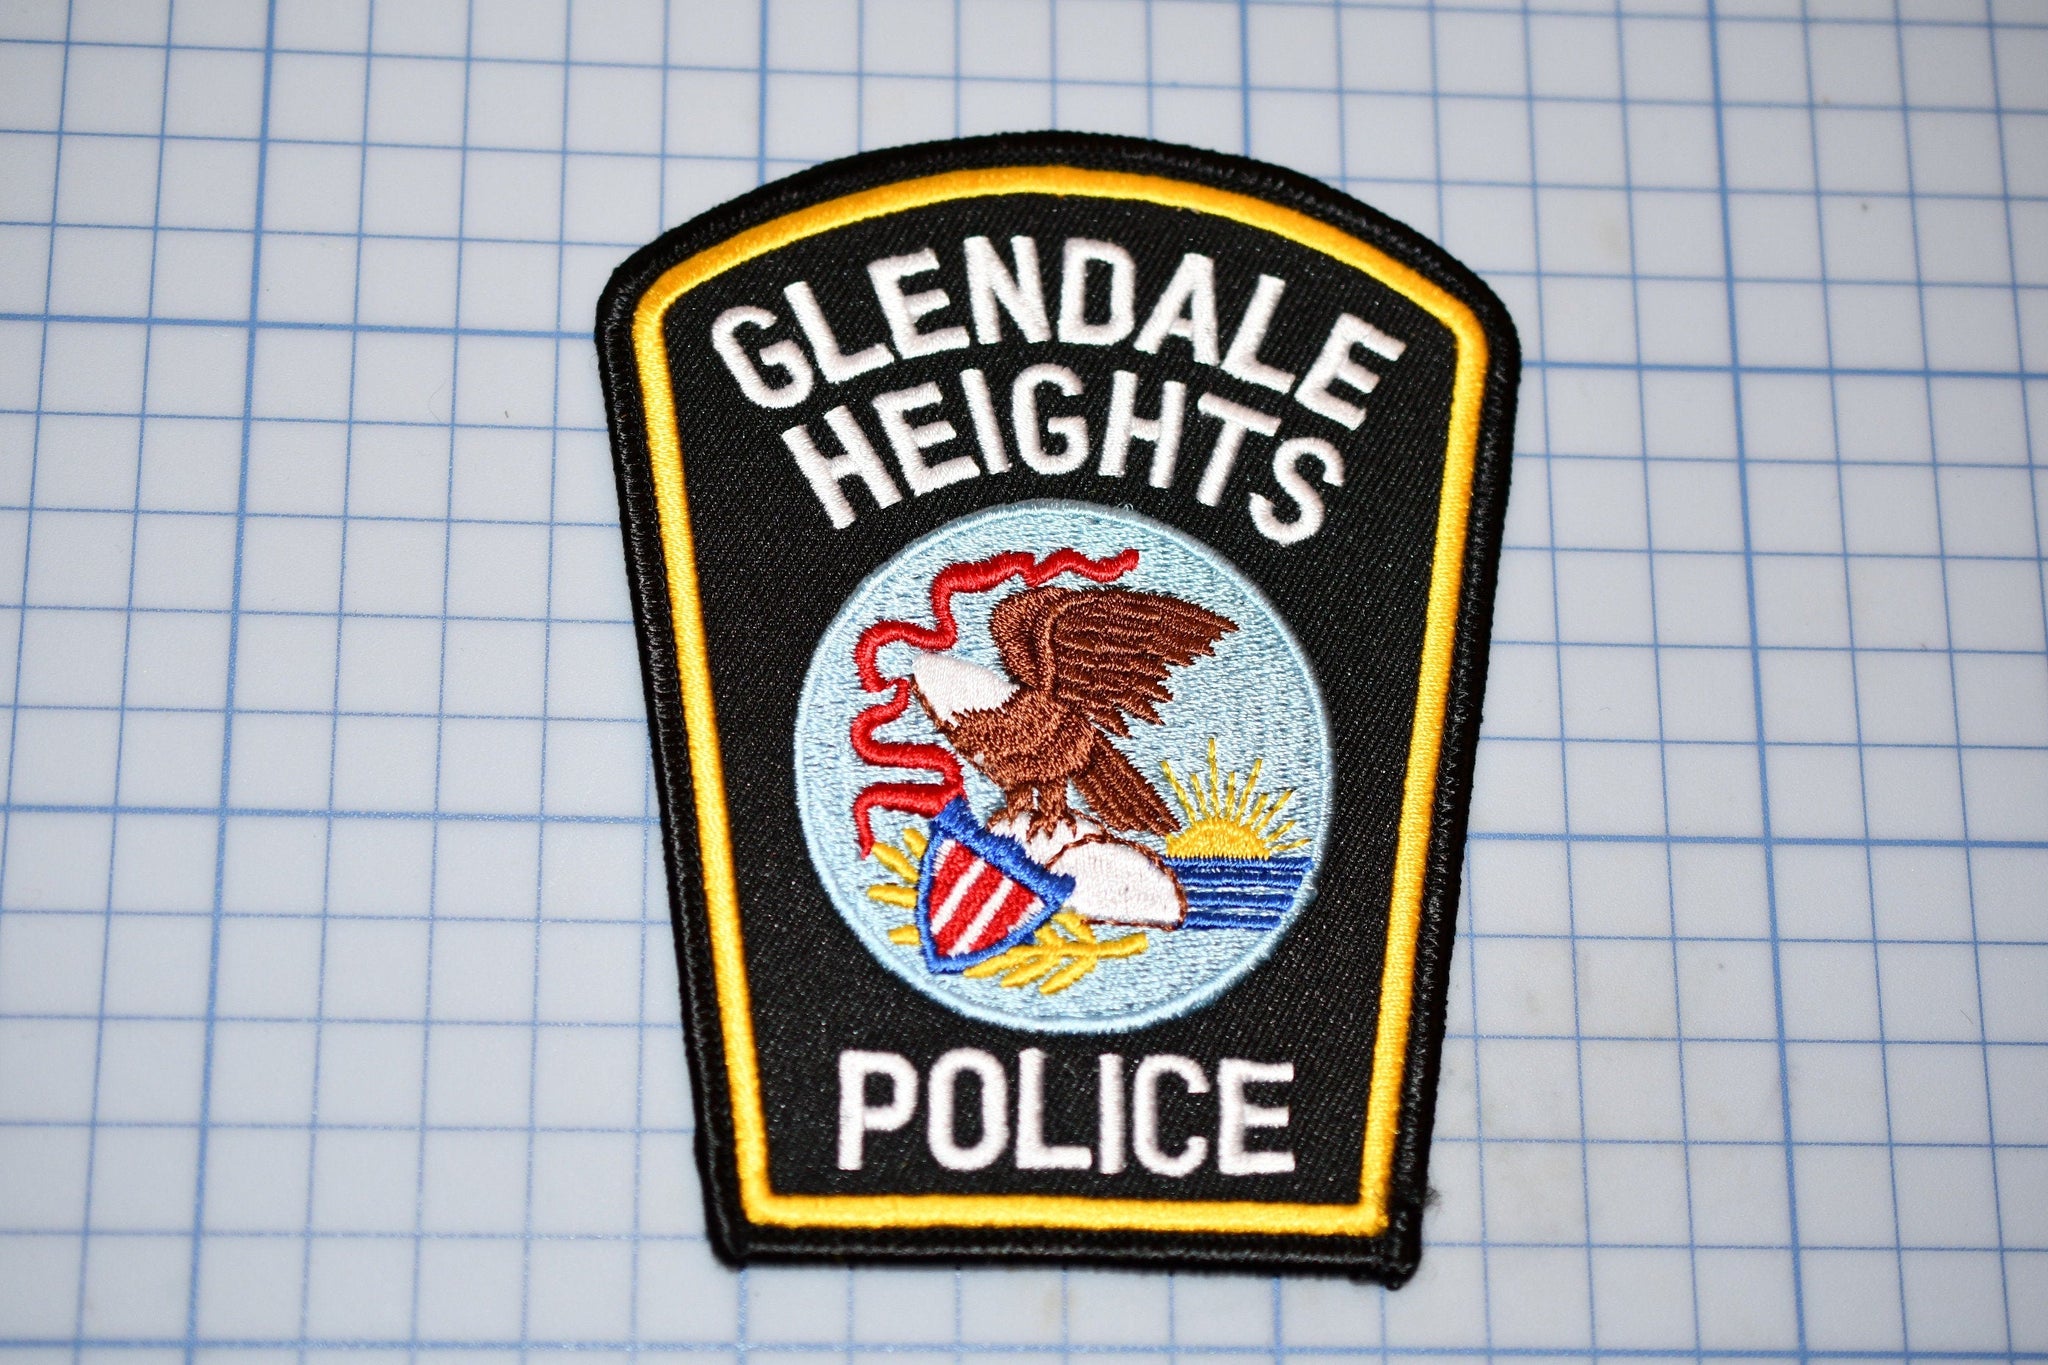 Glendale Heights Illinois Police Patch (B23-322)